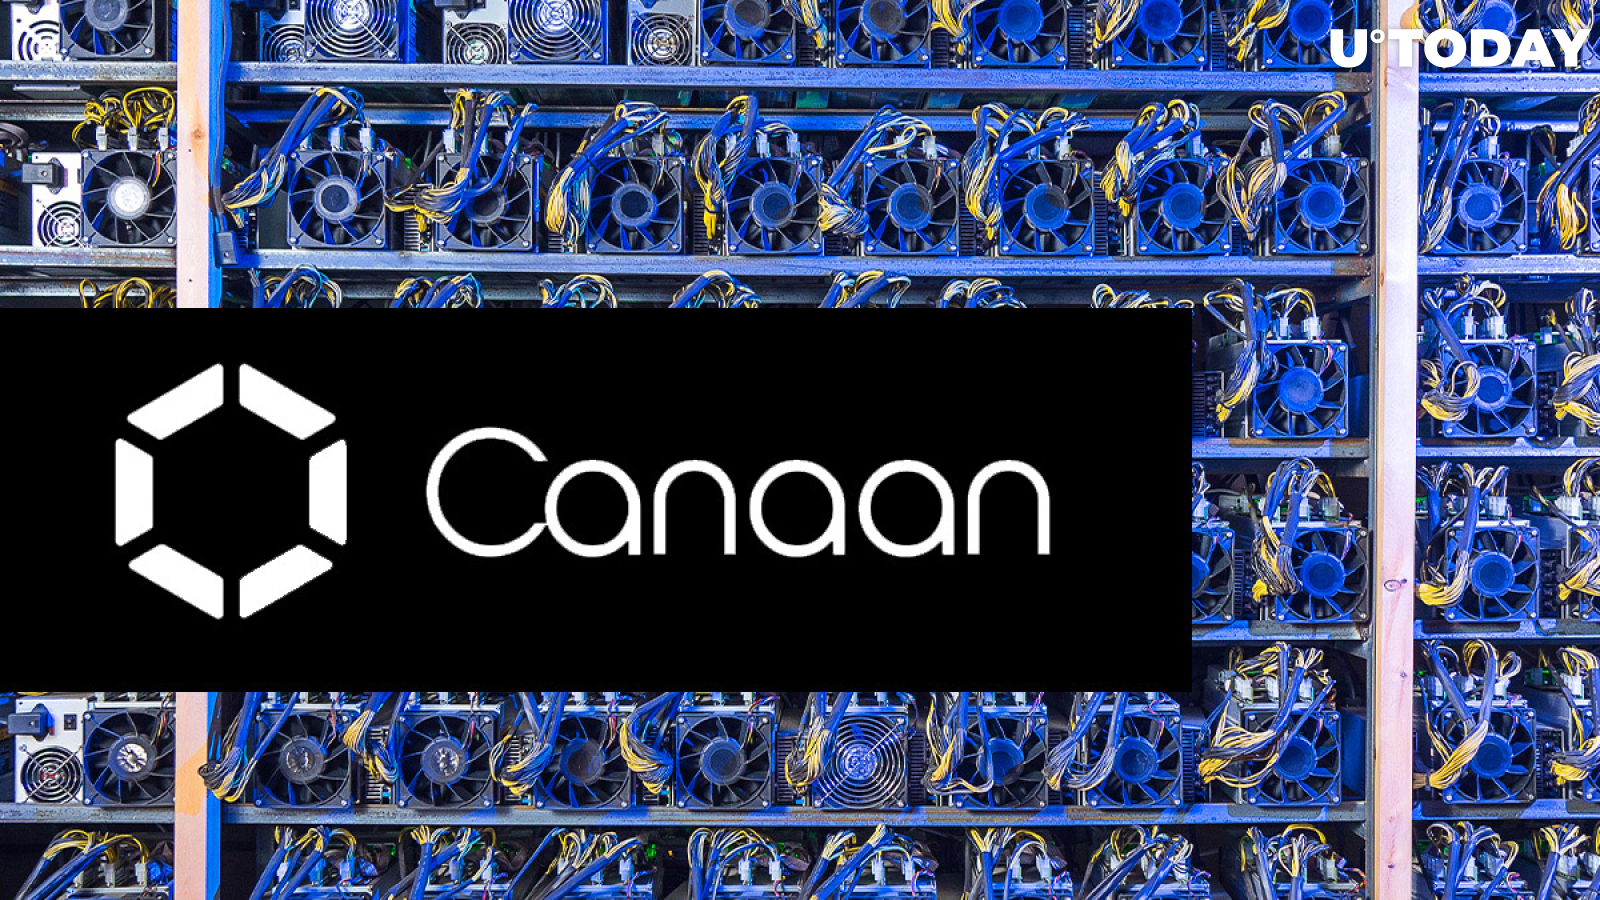 Bitcoin Miner Maker Canaan Loses $5.6 Mln in Q1 as Demand for Mining Equipment Wanes